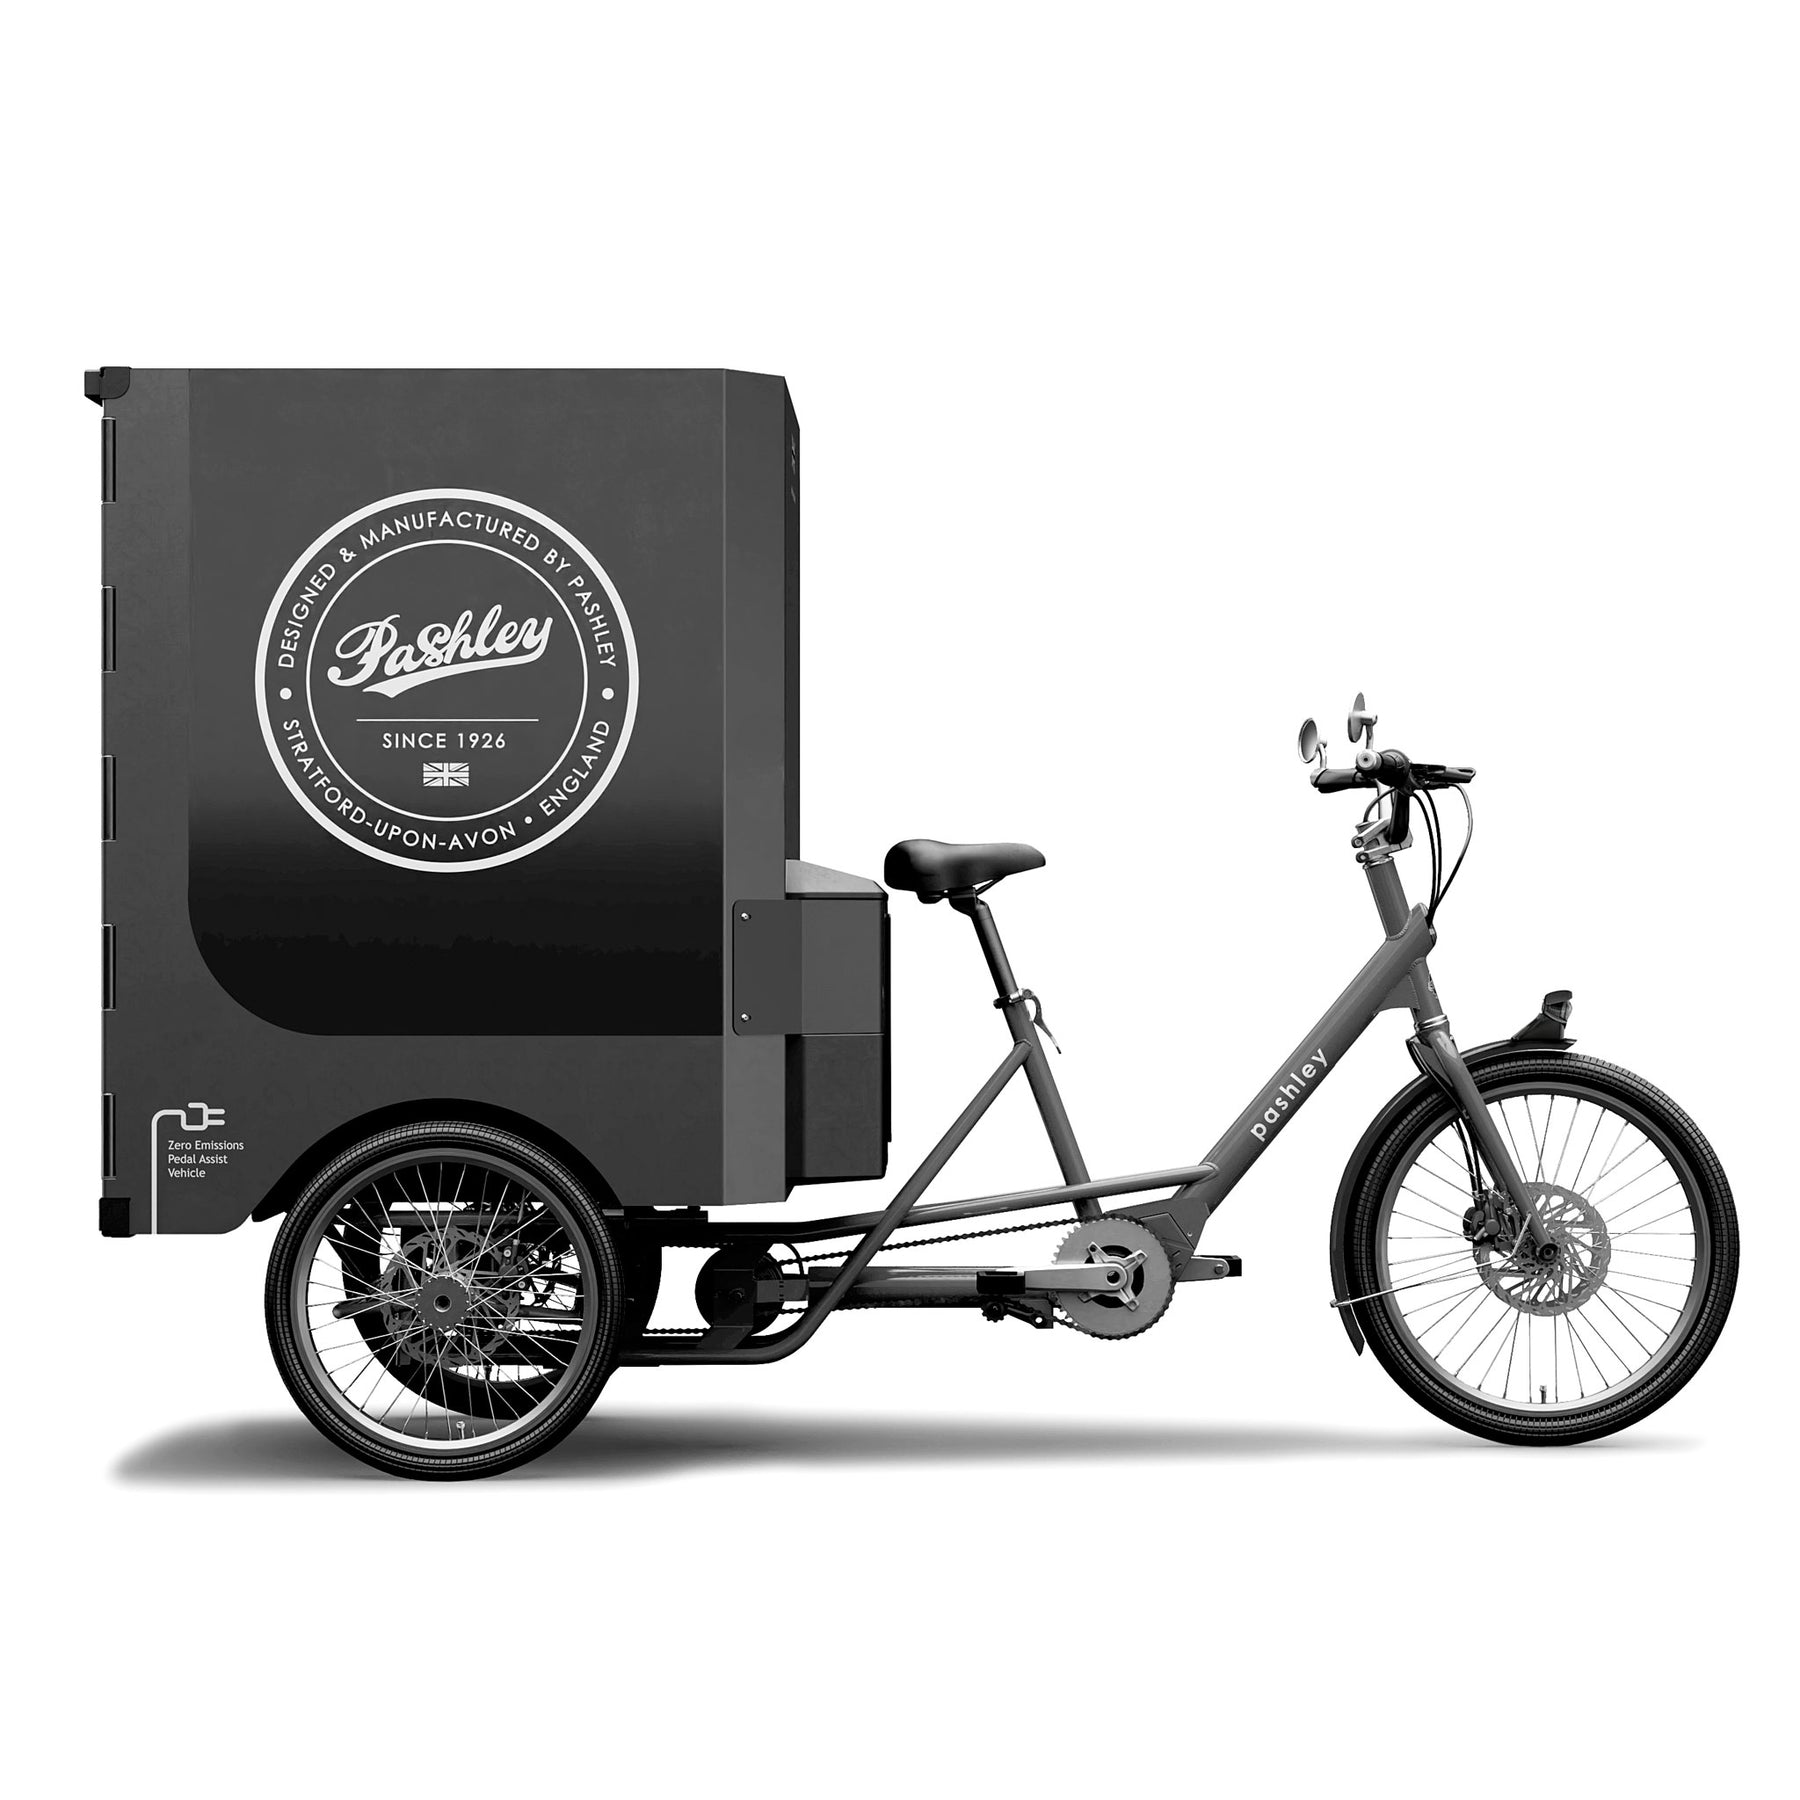 Side view of electric cargo trike with large branded cargo box on the rear.